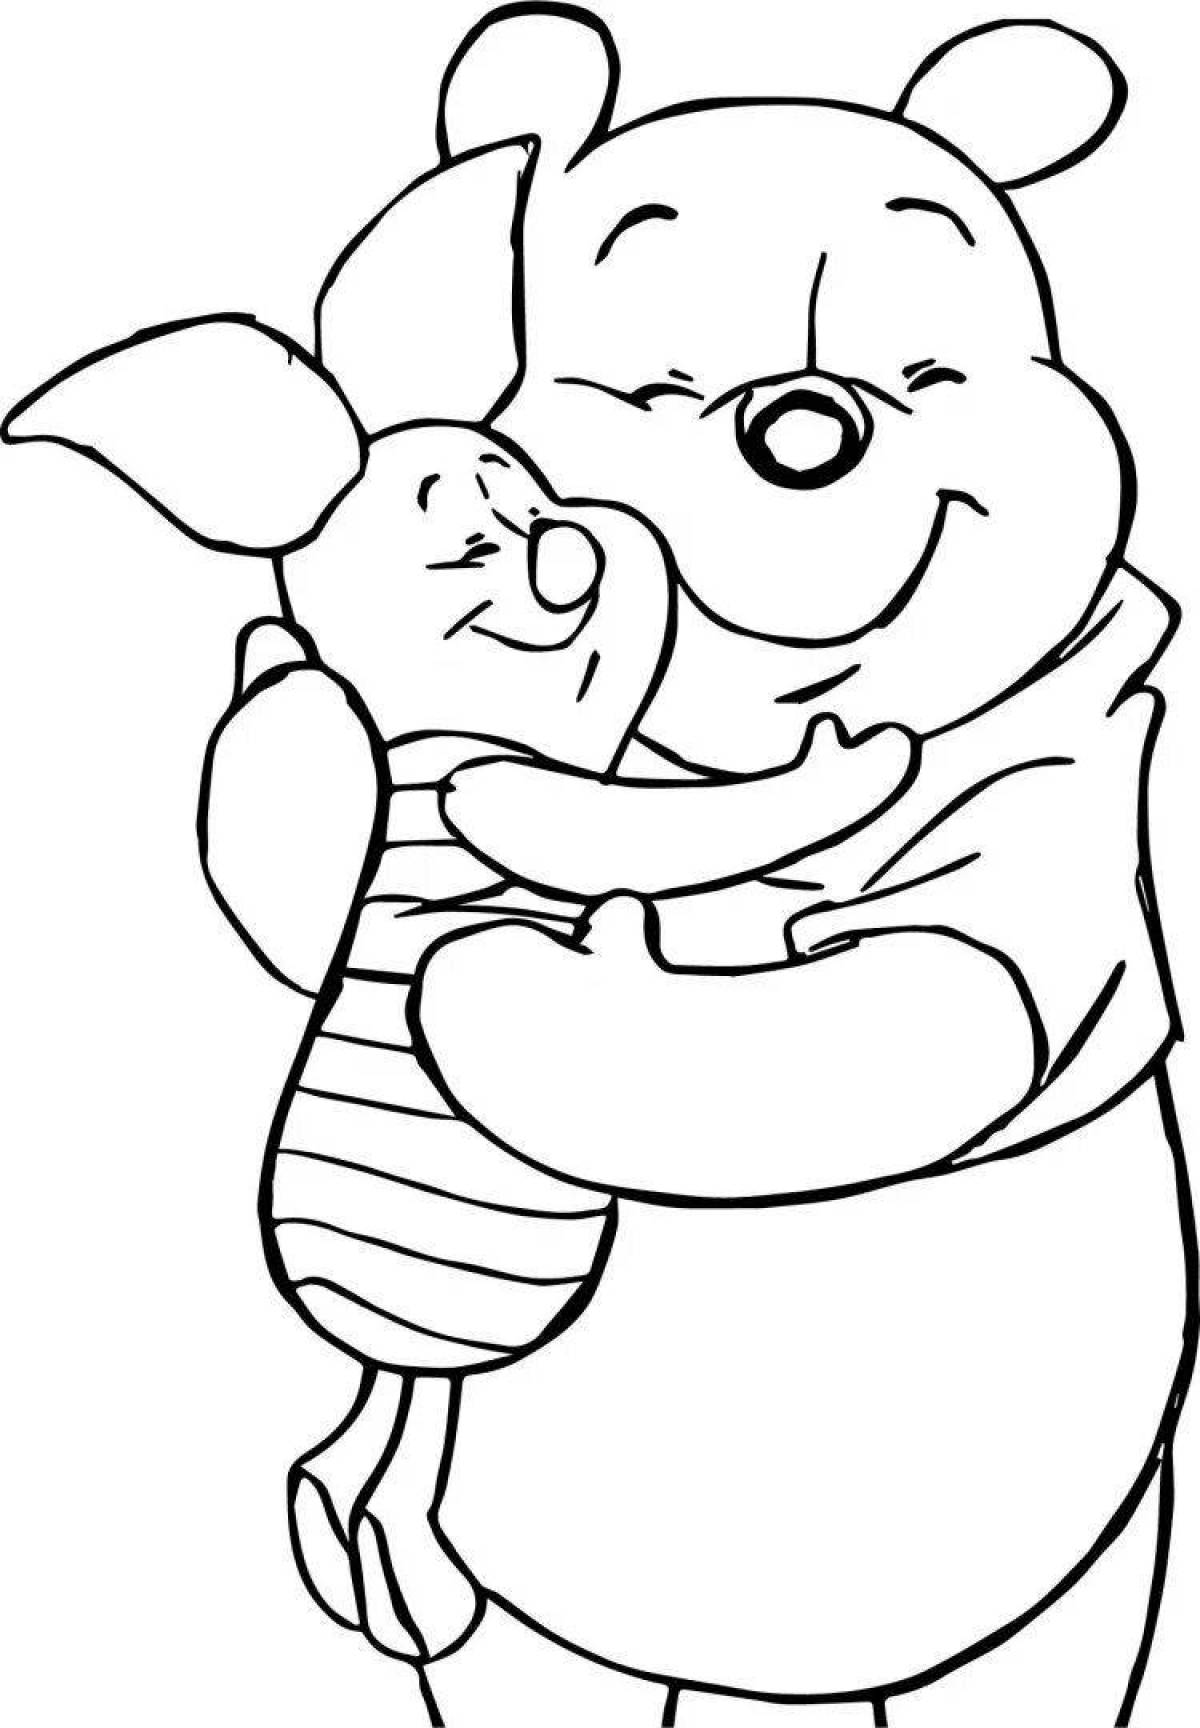 Fascinating coloring for Piglet and Winnipoo